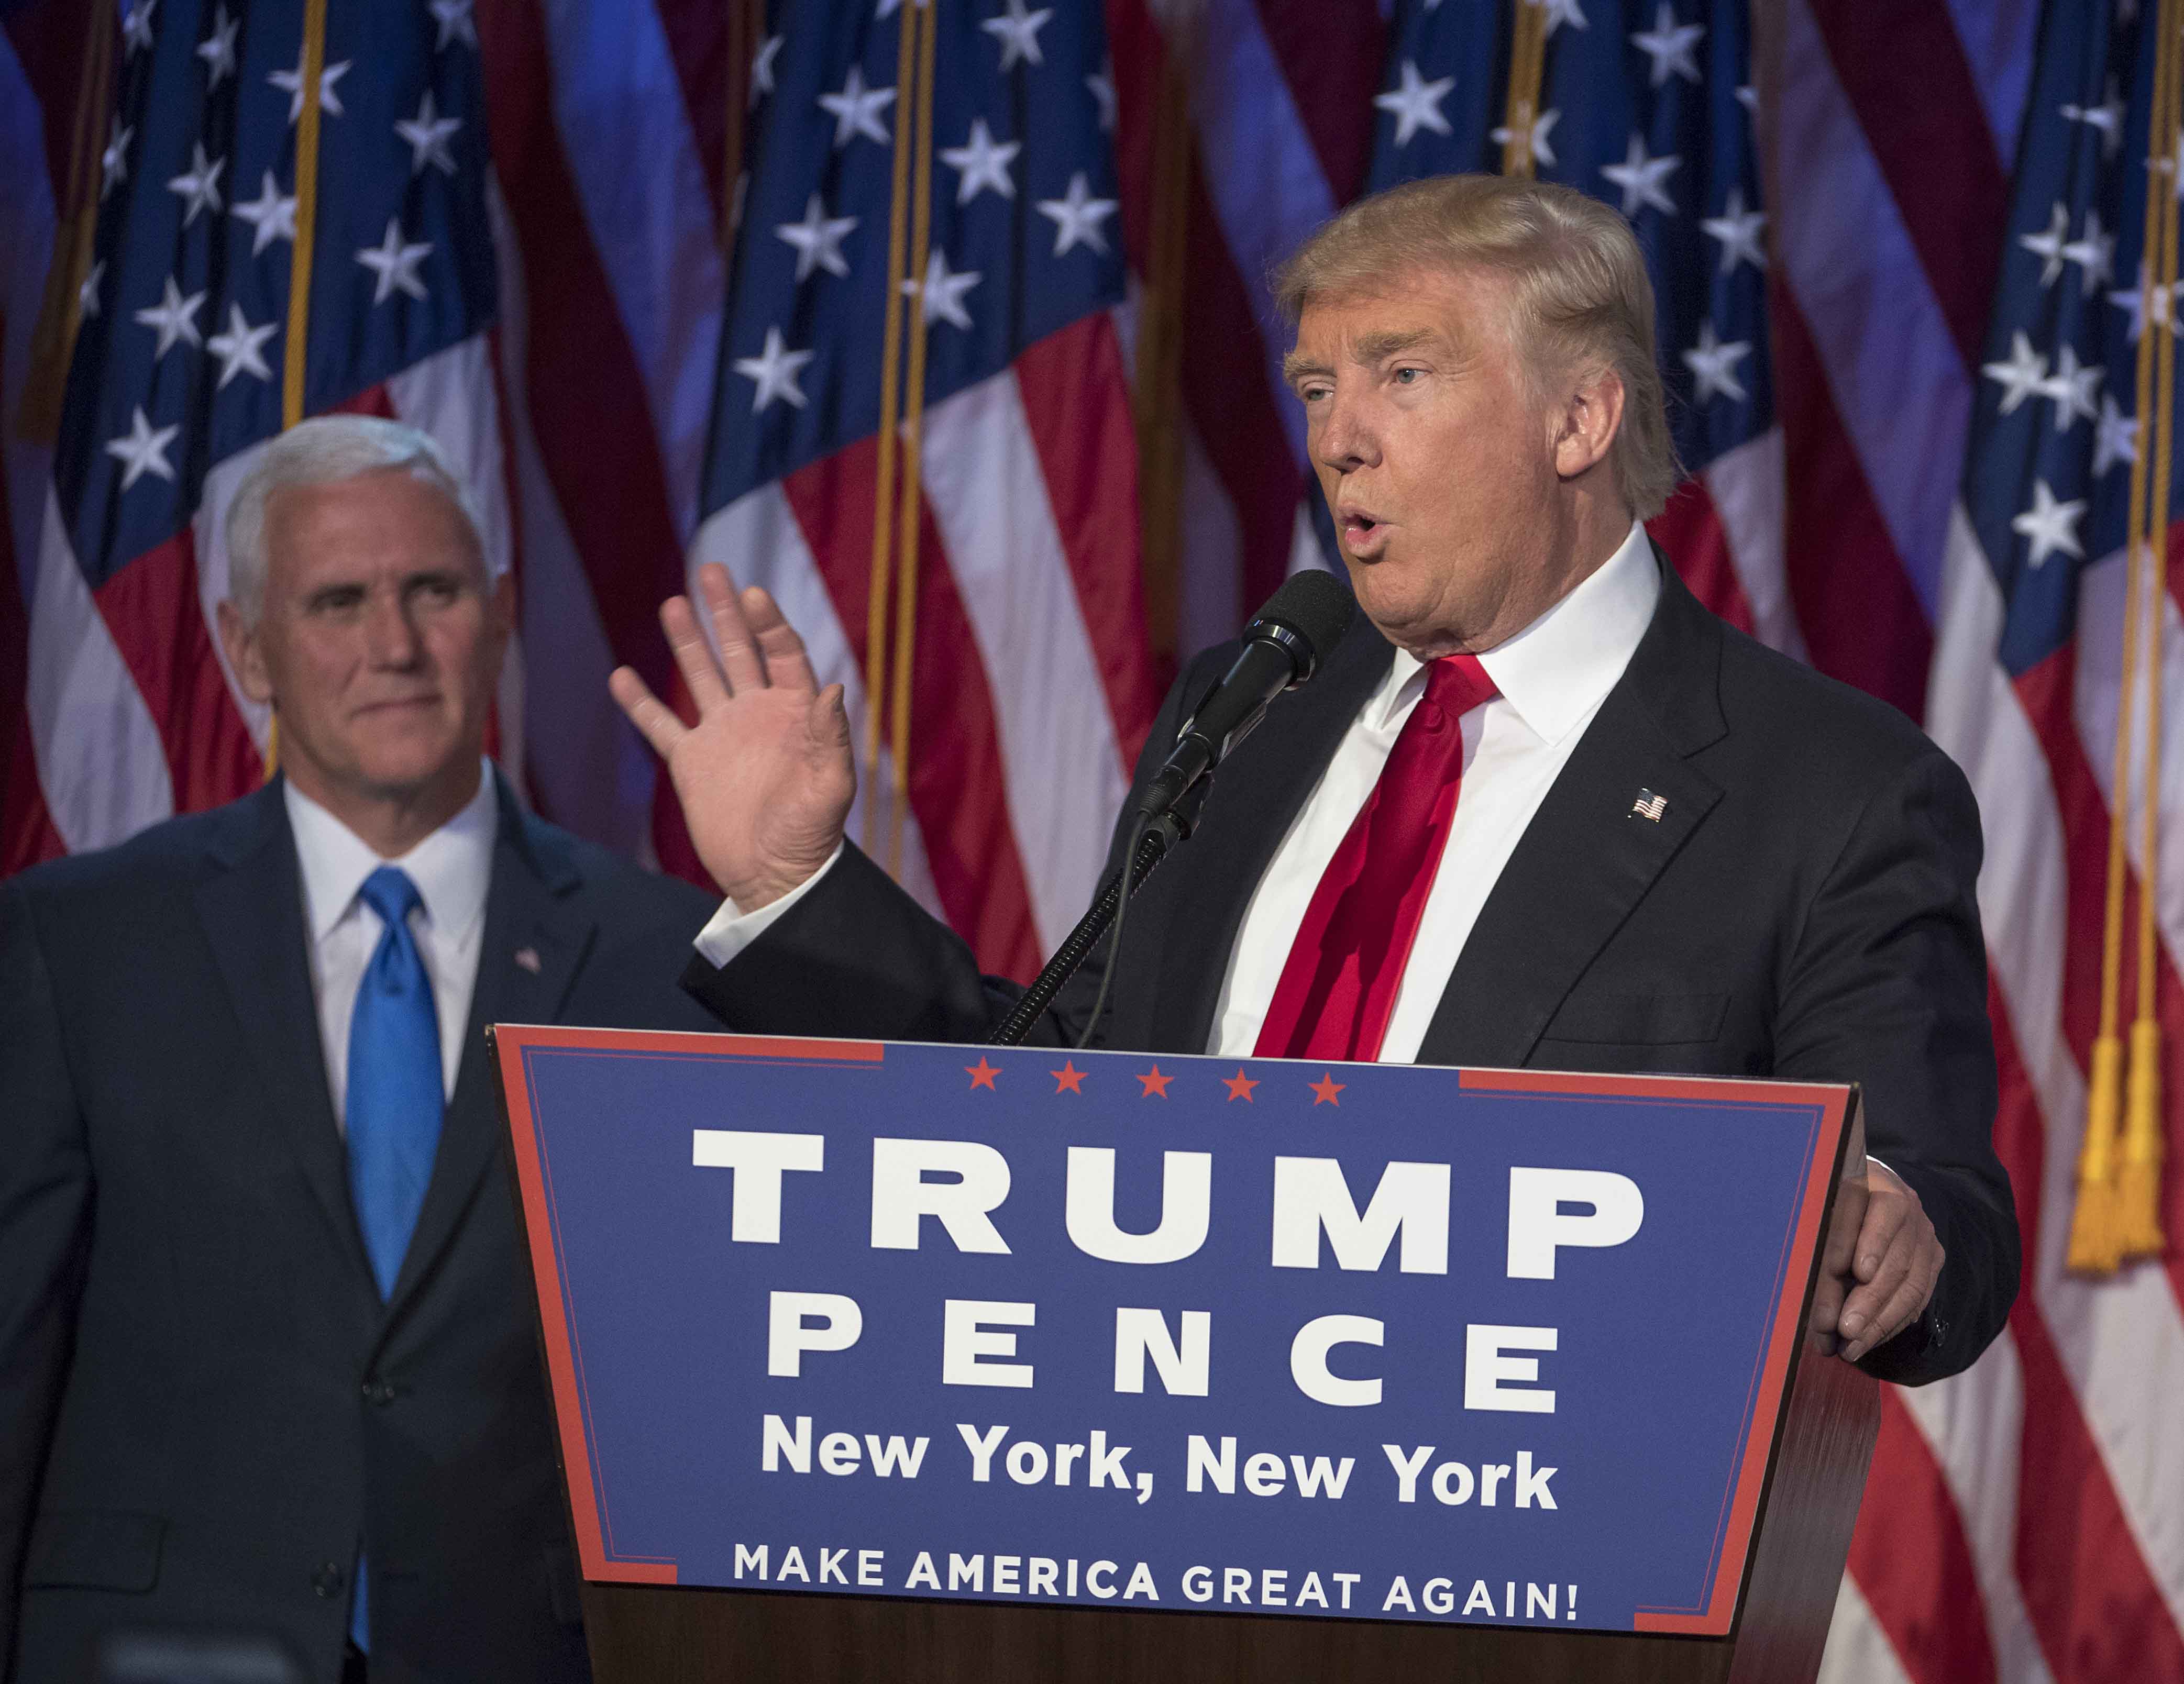 President-elect Donald Trump, joined on stage by running mate Mike Pence, speaks to supporters at the Election Night Party at the Hilton Midtown Hotel in New York City on Wednesday, Nov. 9, 2016. (J. Conrad Williams Jr./Newsday/TNS)